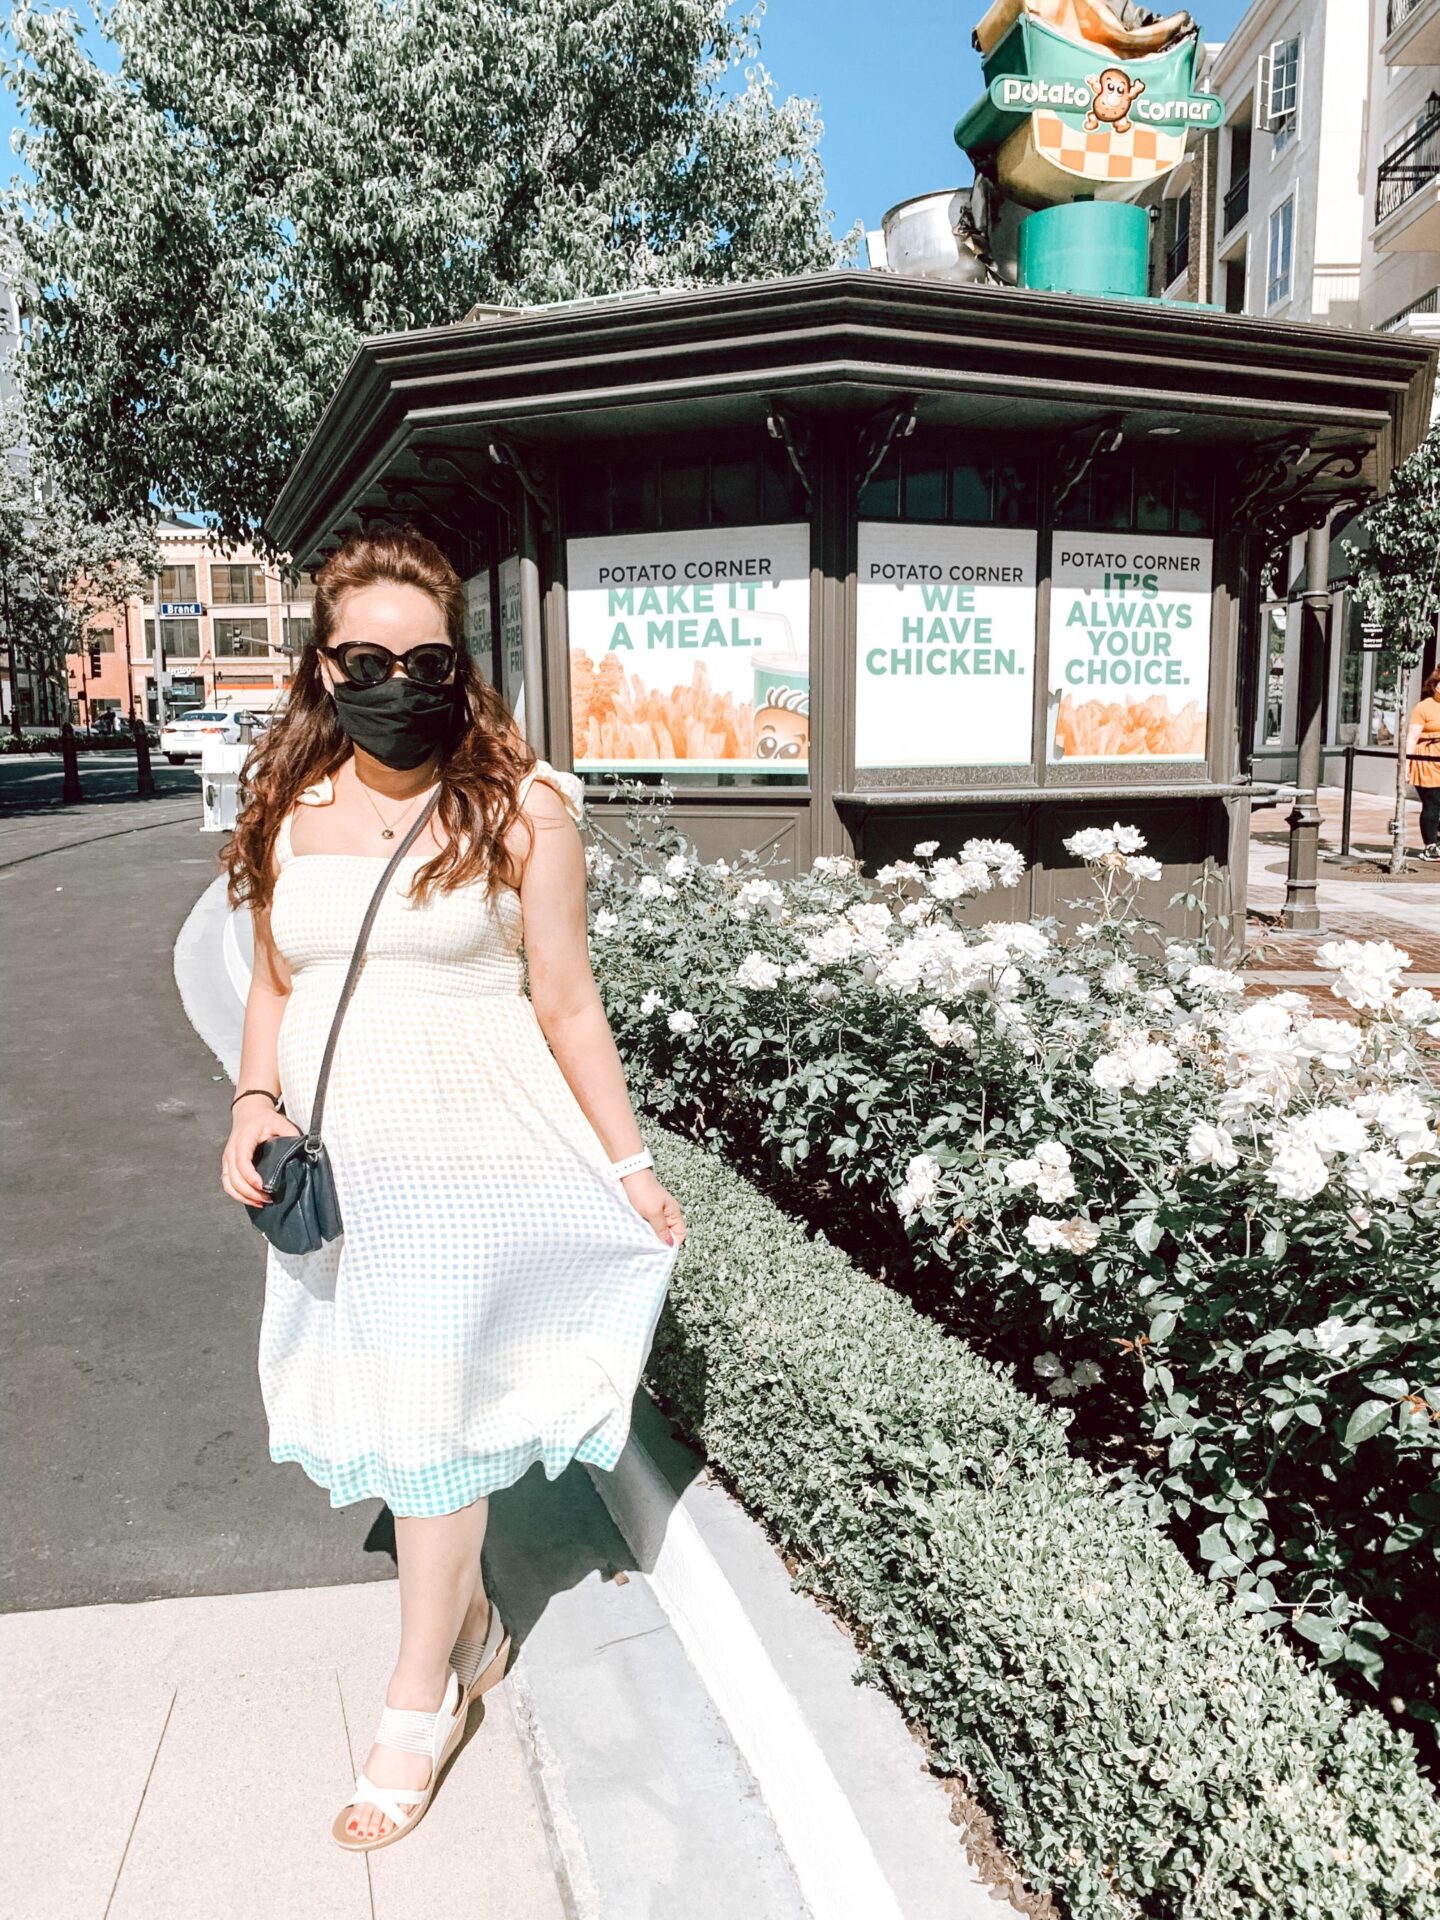 pslilyboutique-on-instagam-apple-watch-summer-2020-outfit-ideas-colorful-polka-dot-dress-los-angeles-fashion-blogger-feeling-groovy-IMG_9380, Instagram: @pslilyboutique, Pinterest, Los Angeles fashion blogger, top fashion blog, best fashion blog, fashion & personal style blog, travel blog, lifestyle blogger, travel blogger, LA fashion blogger, chicago based fashion blogger, fashion influencer, luxury fashion, luxury travel, luxury influencer, luxury lifestyle, lifestyle blog